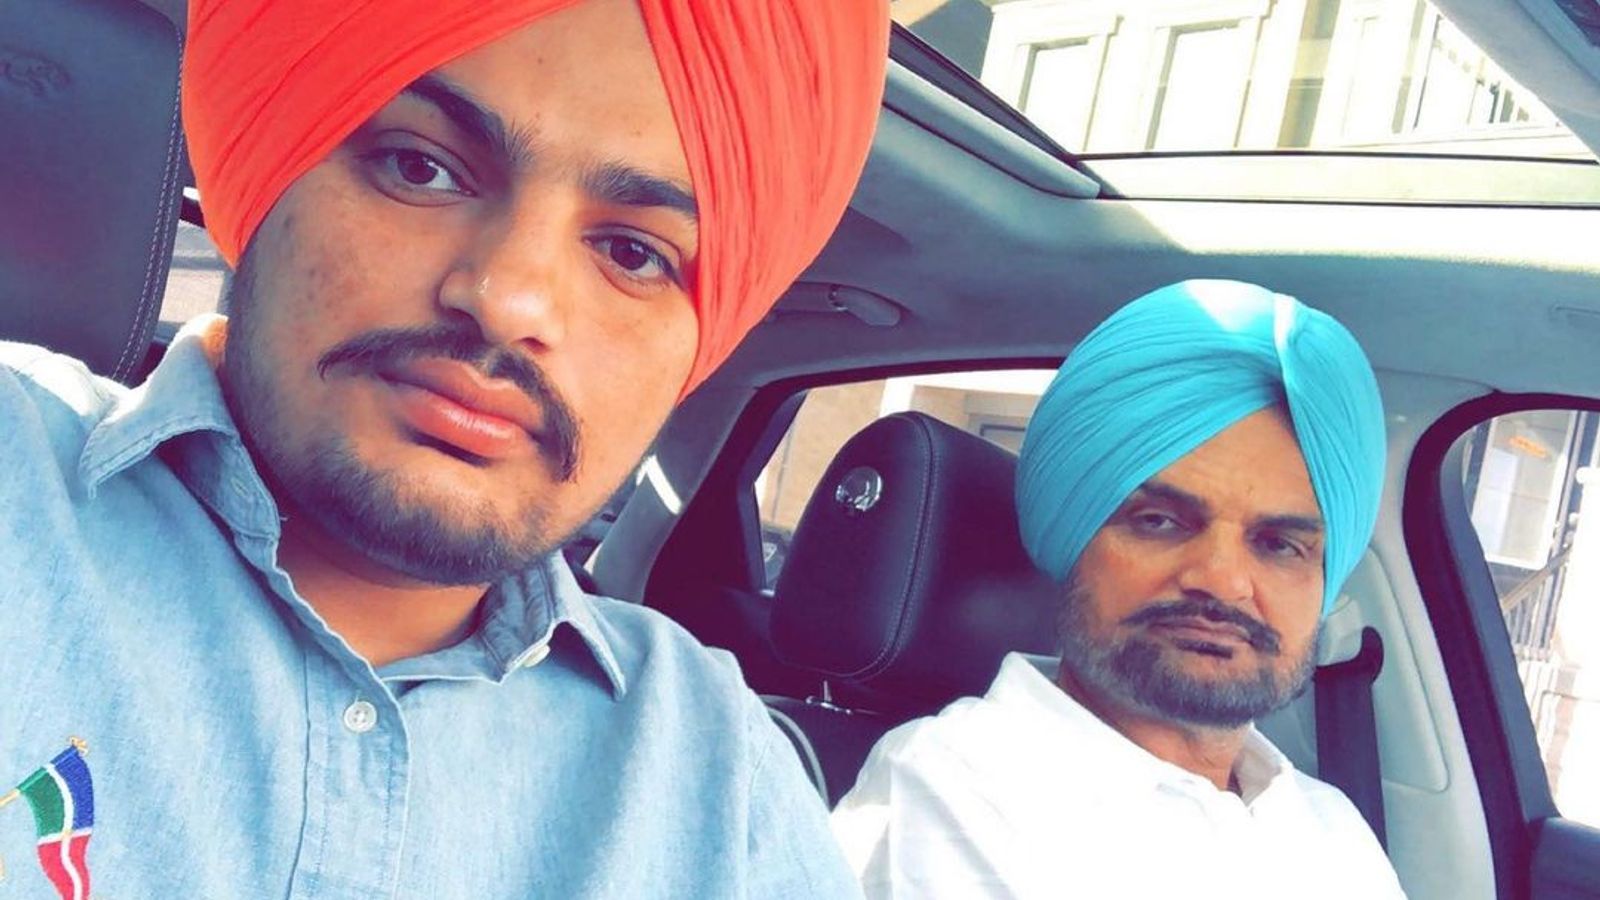 Father of murdered hip hop star Sidhu Moose Wala says investigation is moving too slowly